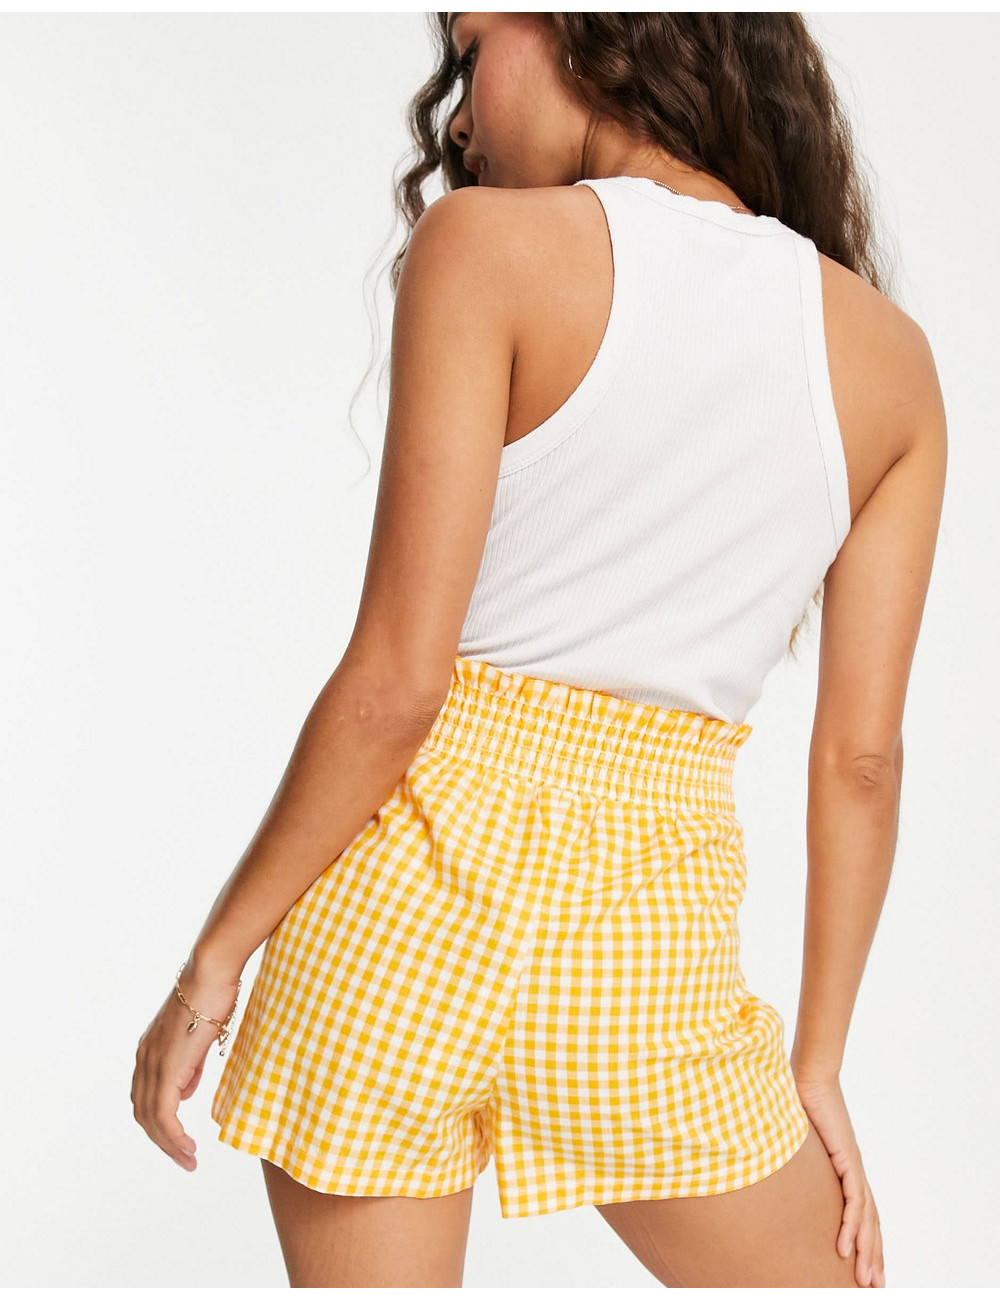 Influence Petite shorts in...